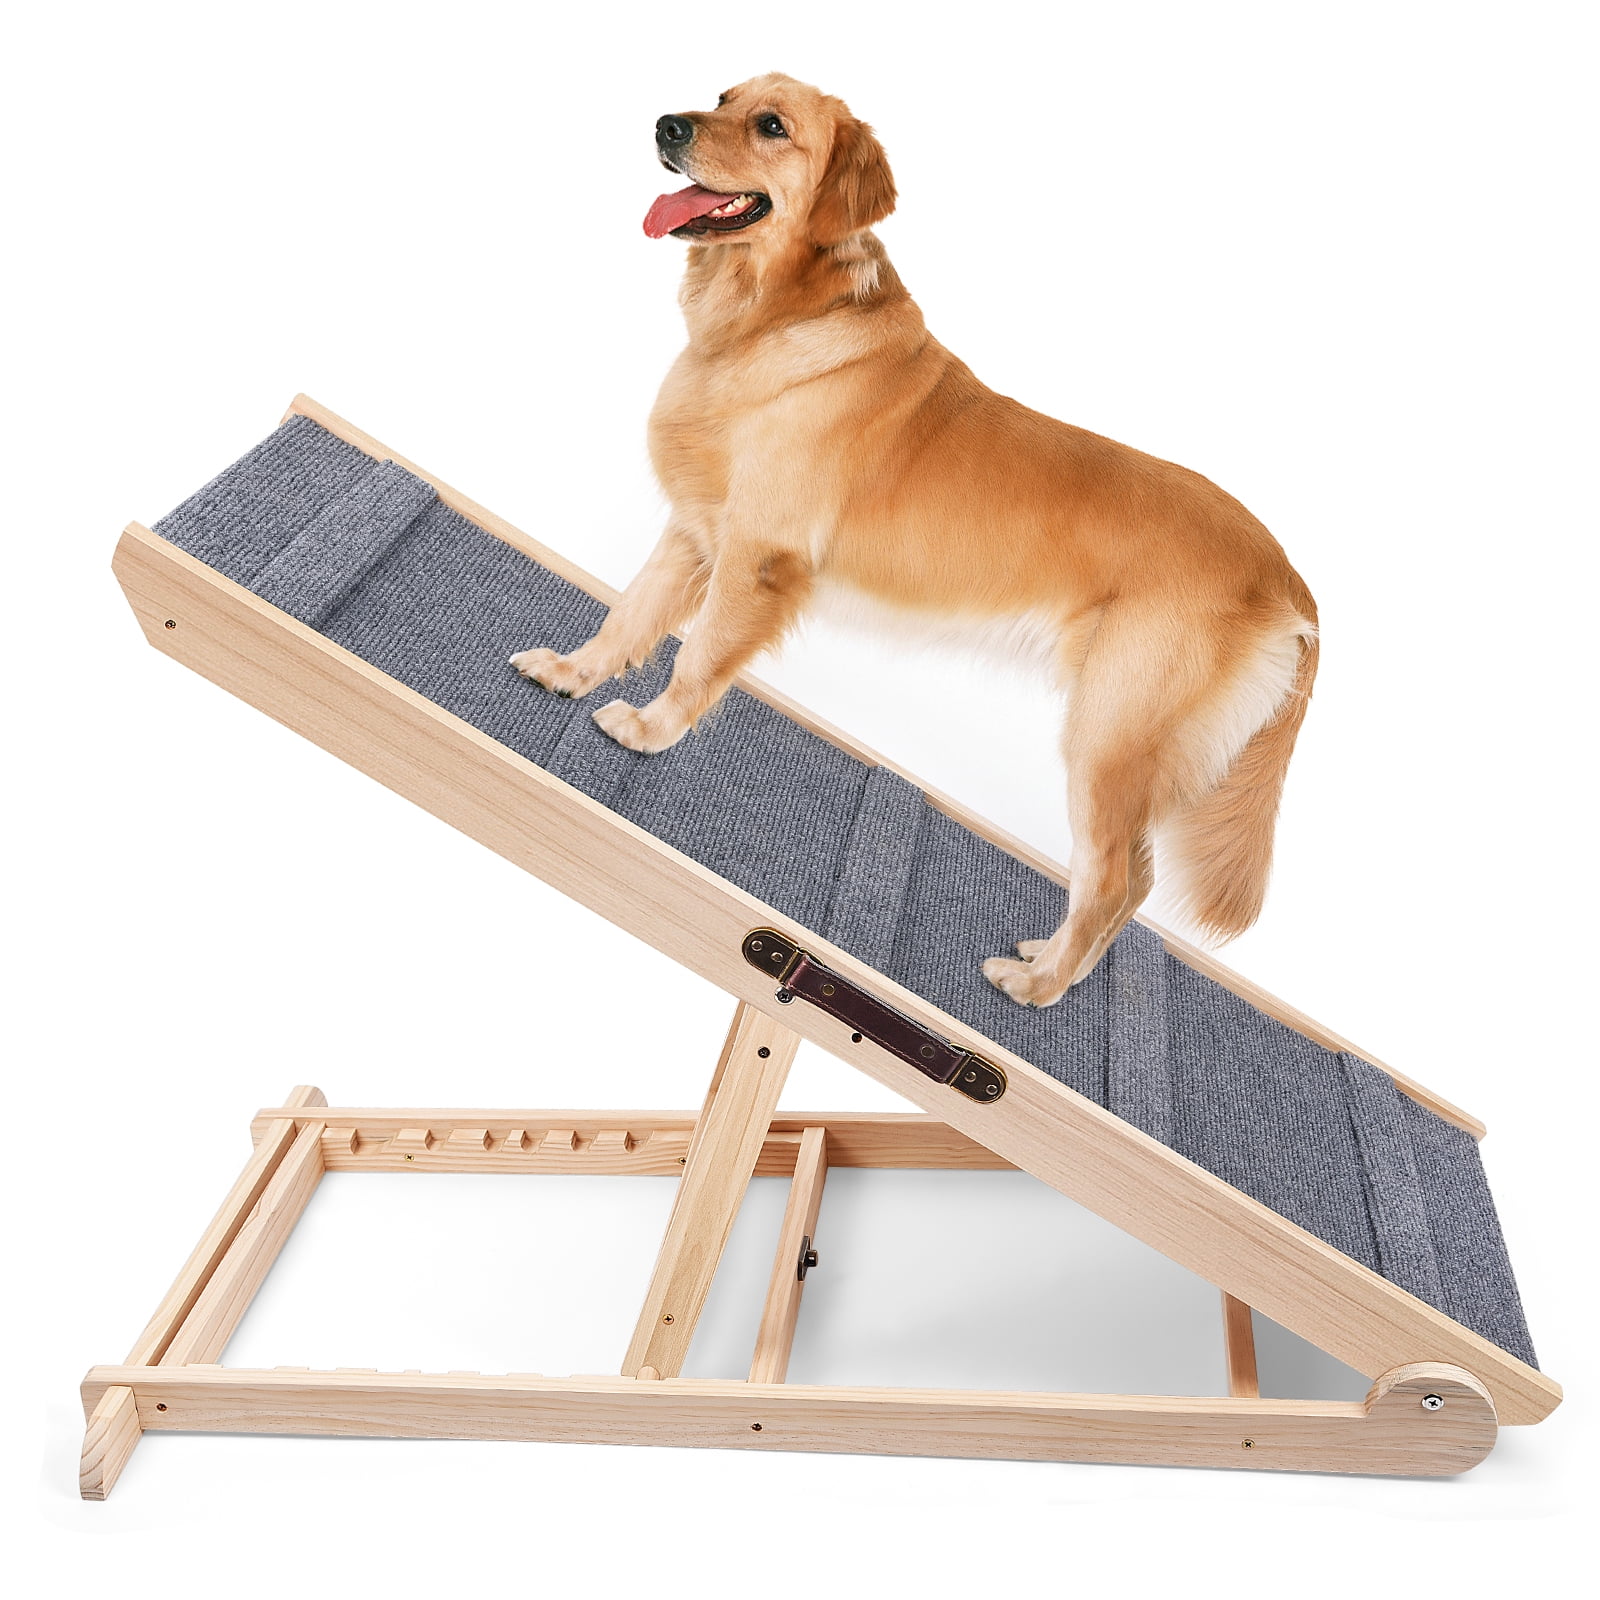 Black Non Slip Free Standing Wide Ramp Support 160 Lbs Large Dogs Folding Portable Dog & Cat Access Perfect for Beds and Cars IN HAND Adjustable Pet Ramp 